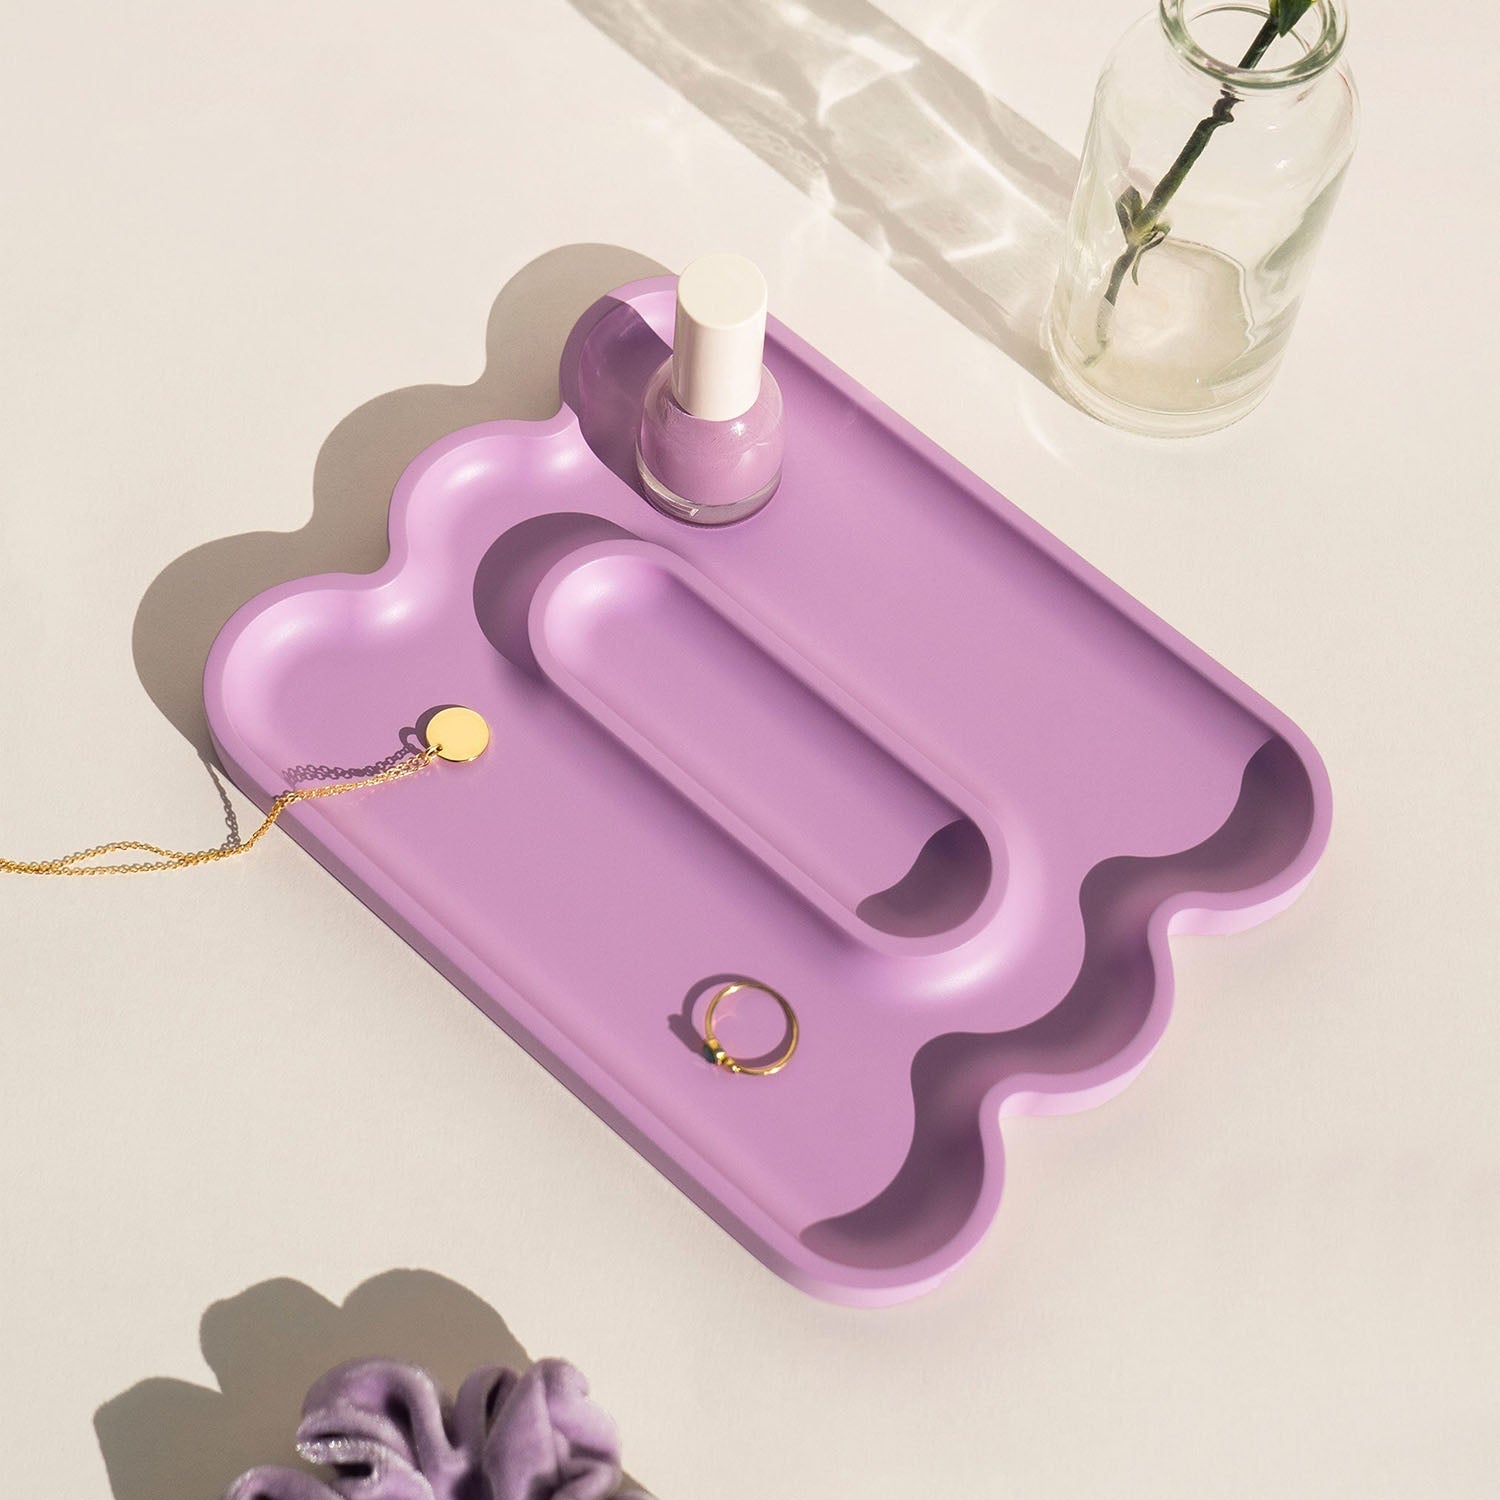 Templo Catchall Wave in purple by OCTAEVO